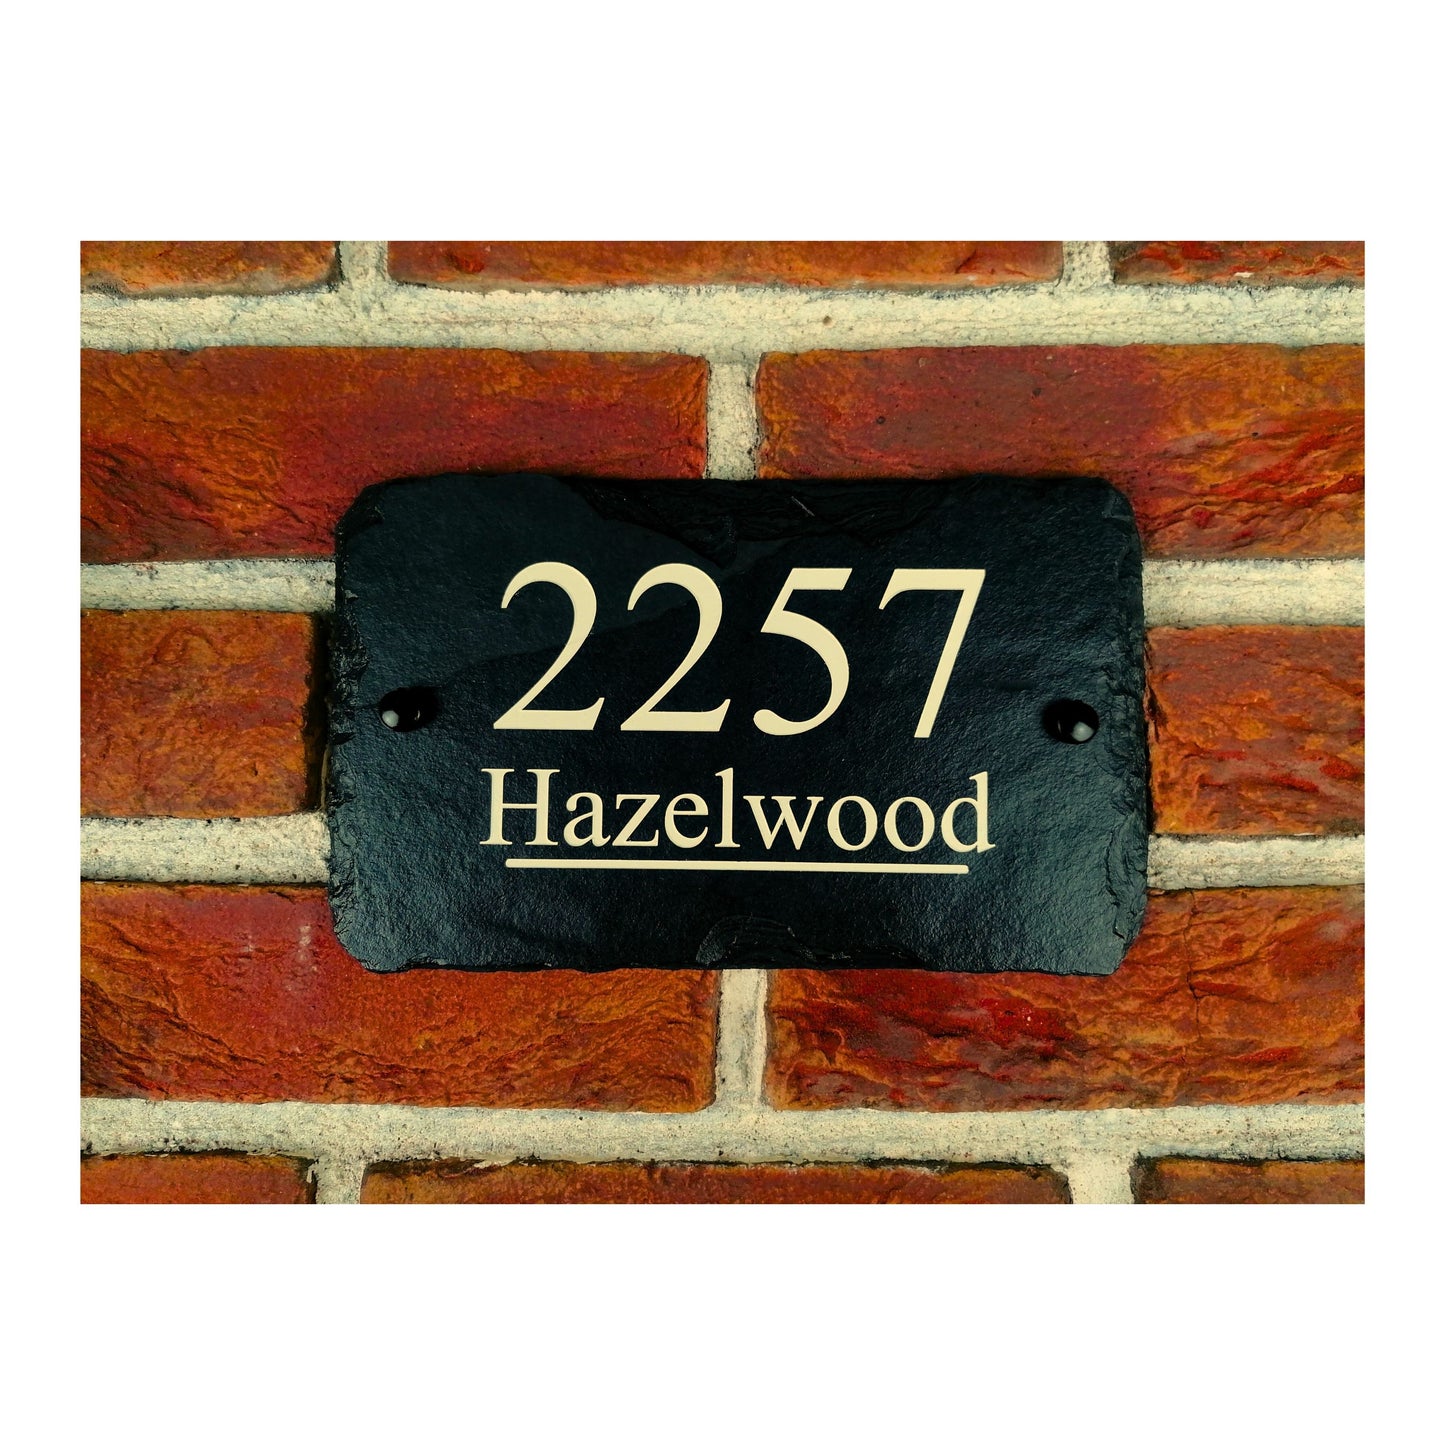 Engraved Natural Slate House Address Sign - Rustic Farmhouse Style Door Number - Wedding, Housewarming, Anniversary Gift Idea